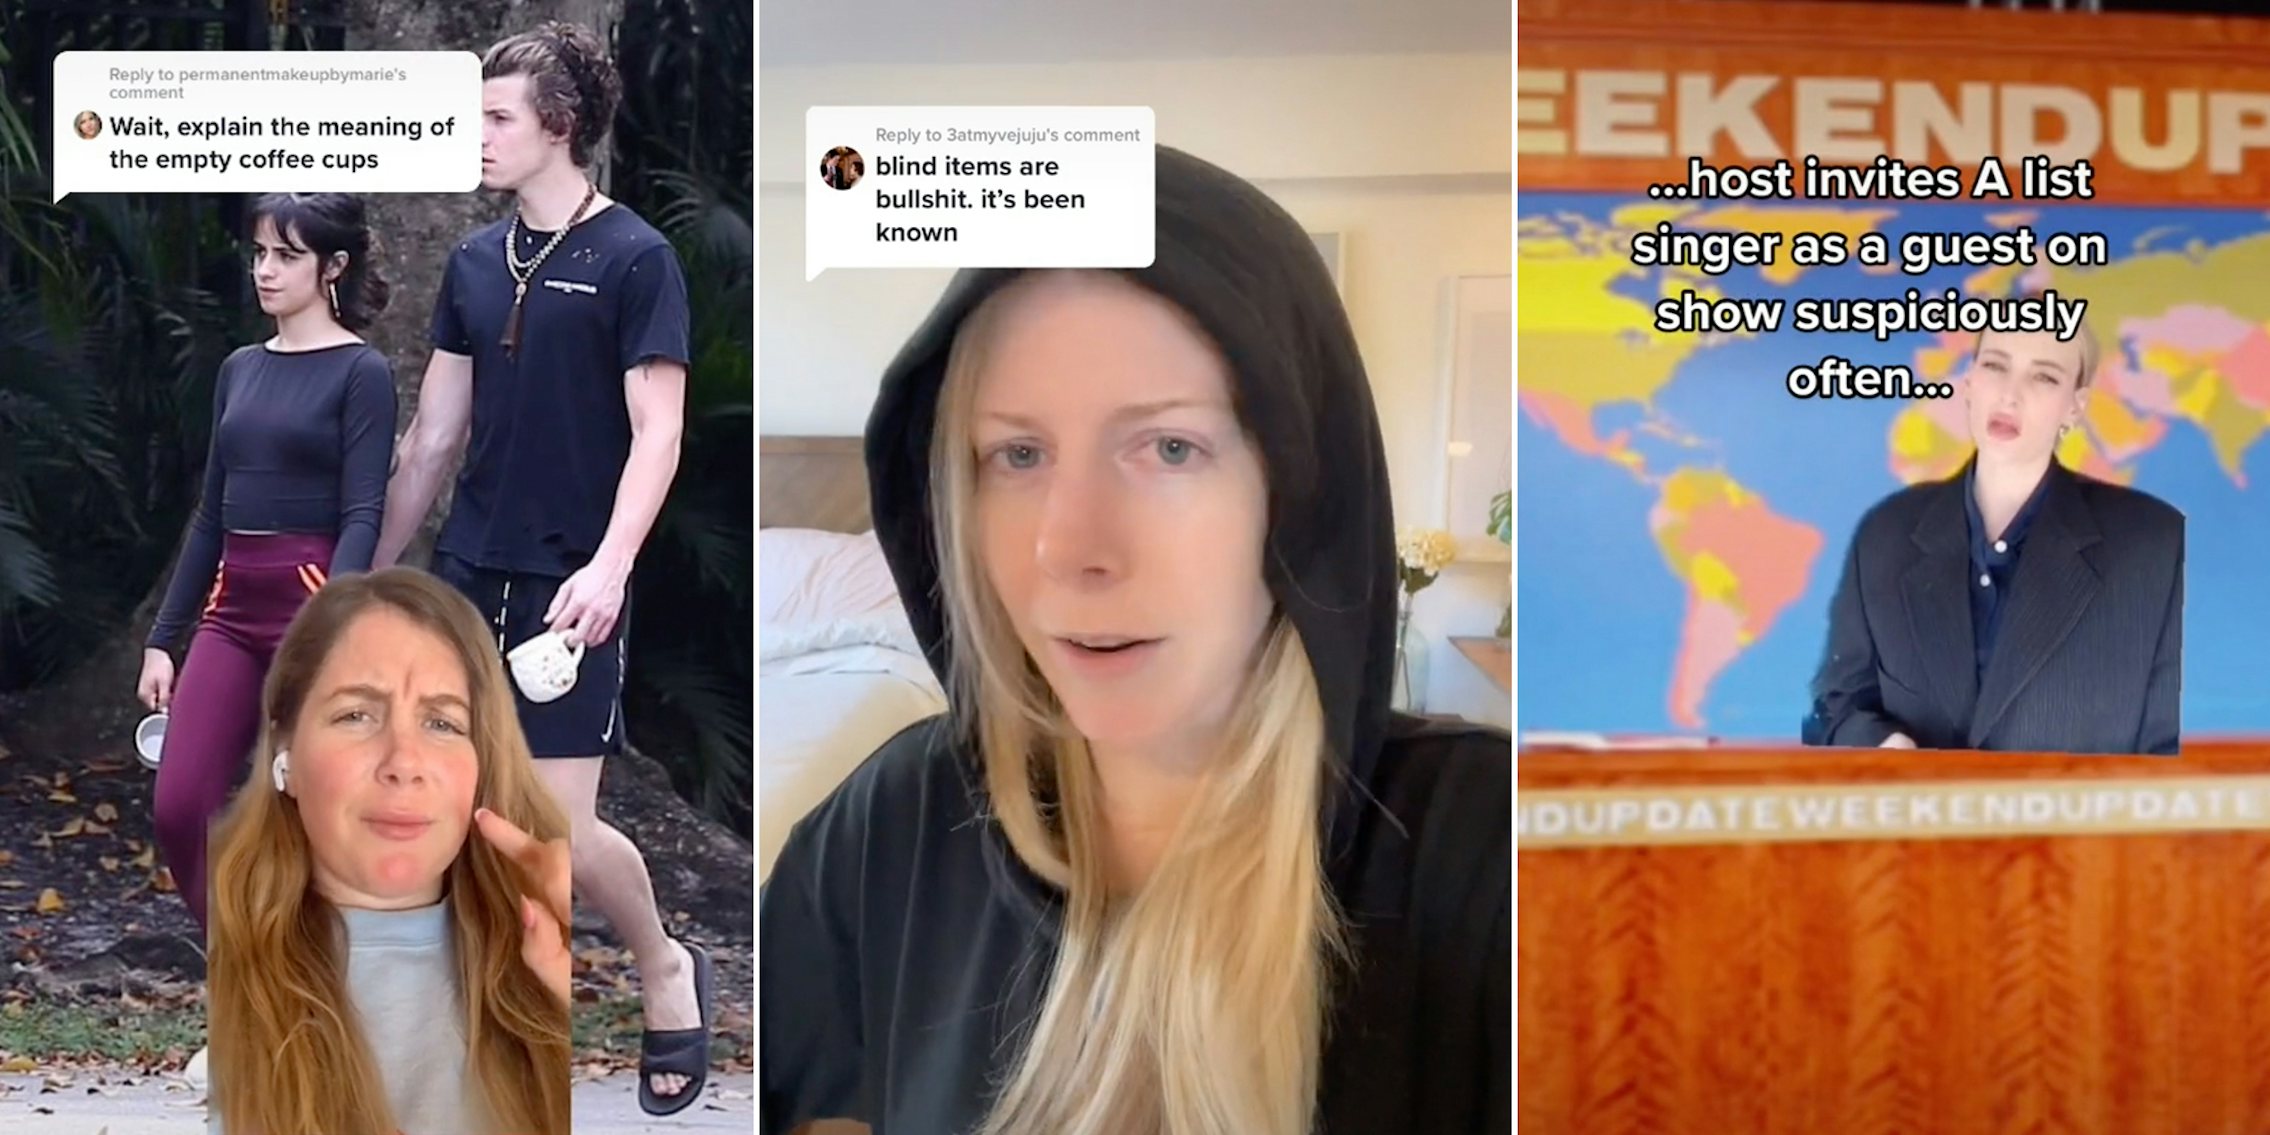 Three TikTok panels showing users answering questions about celebrity gossip